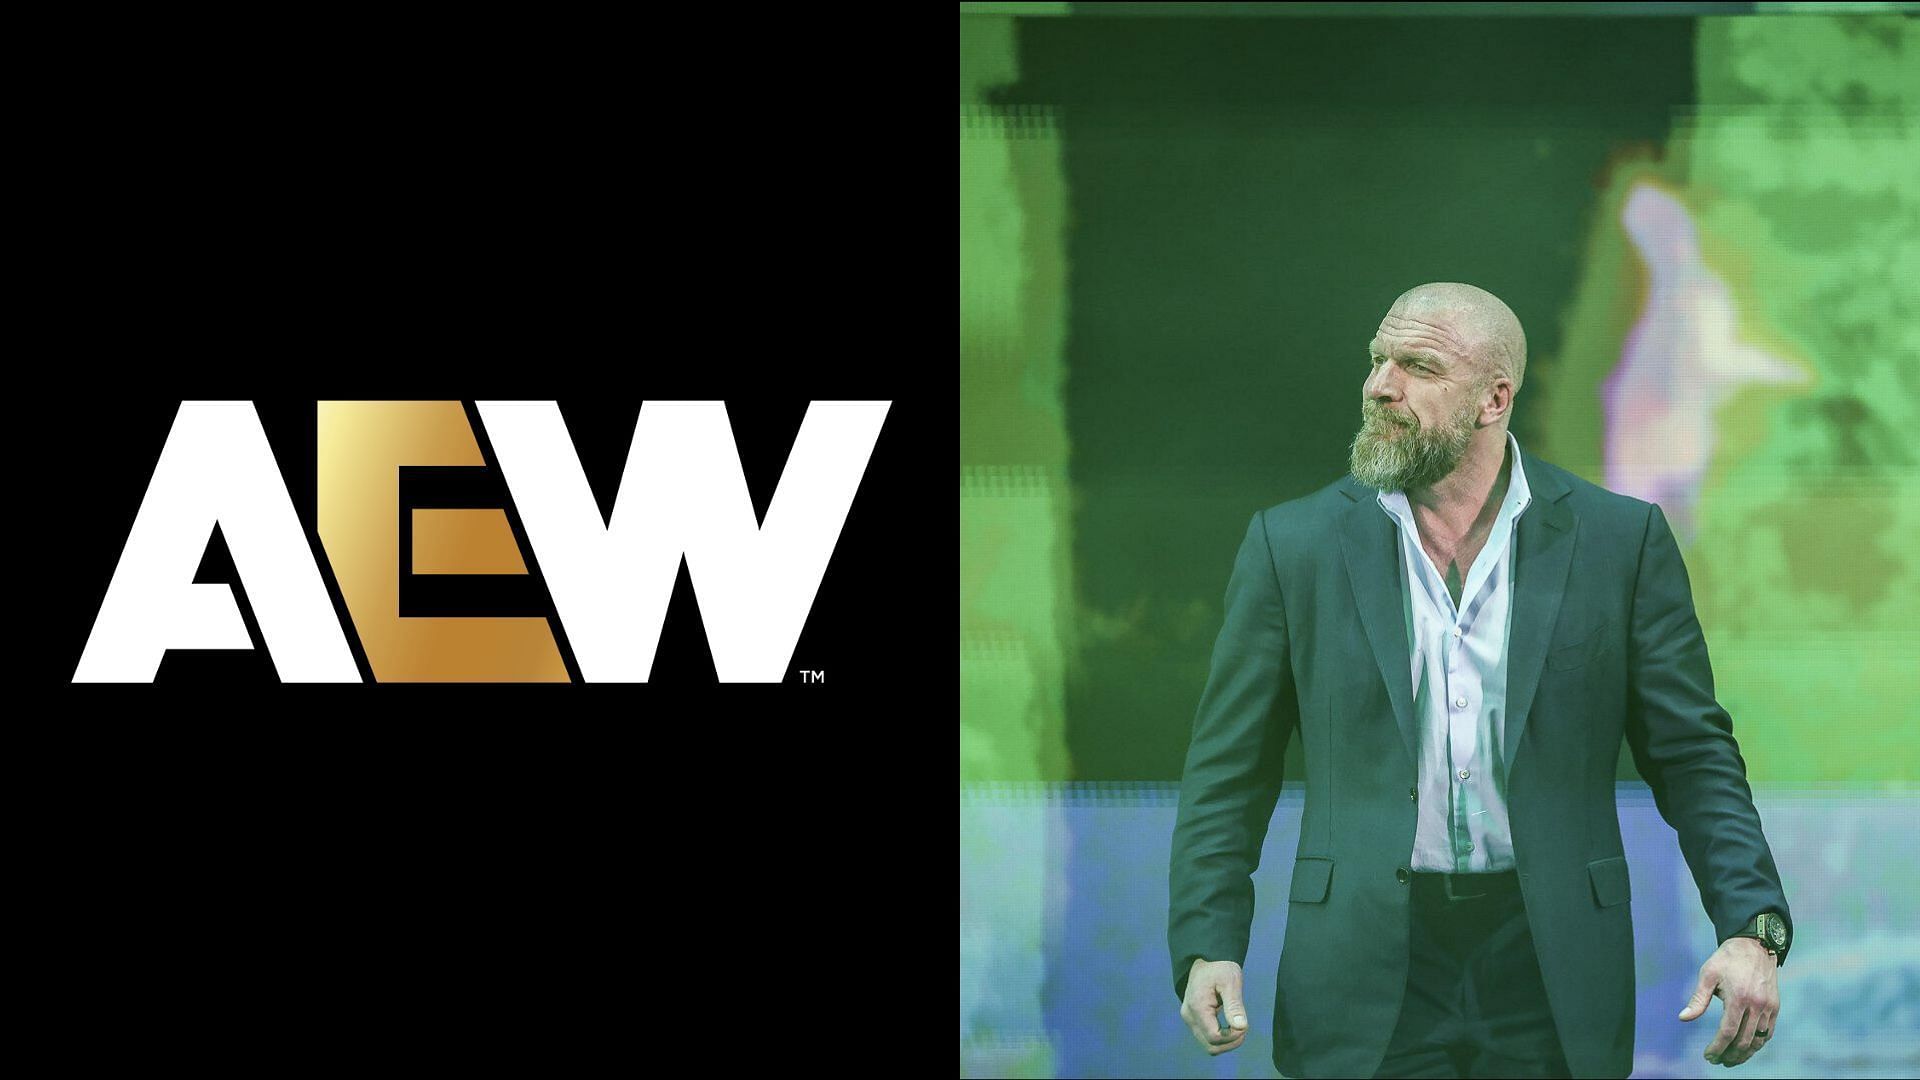 Triple H is the Chief Content Officer of WWE [Photo courtesy of WWE